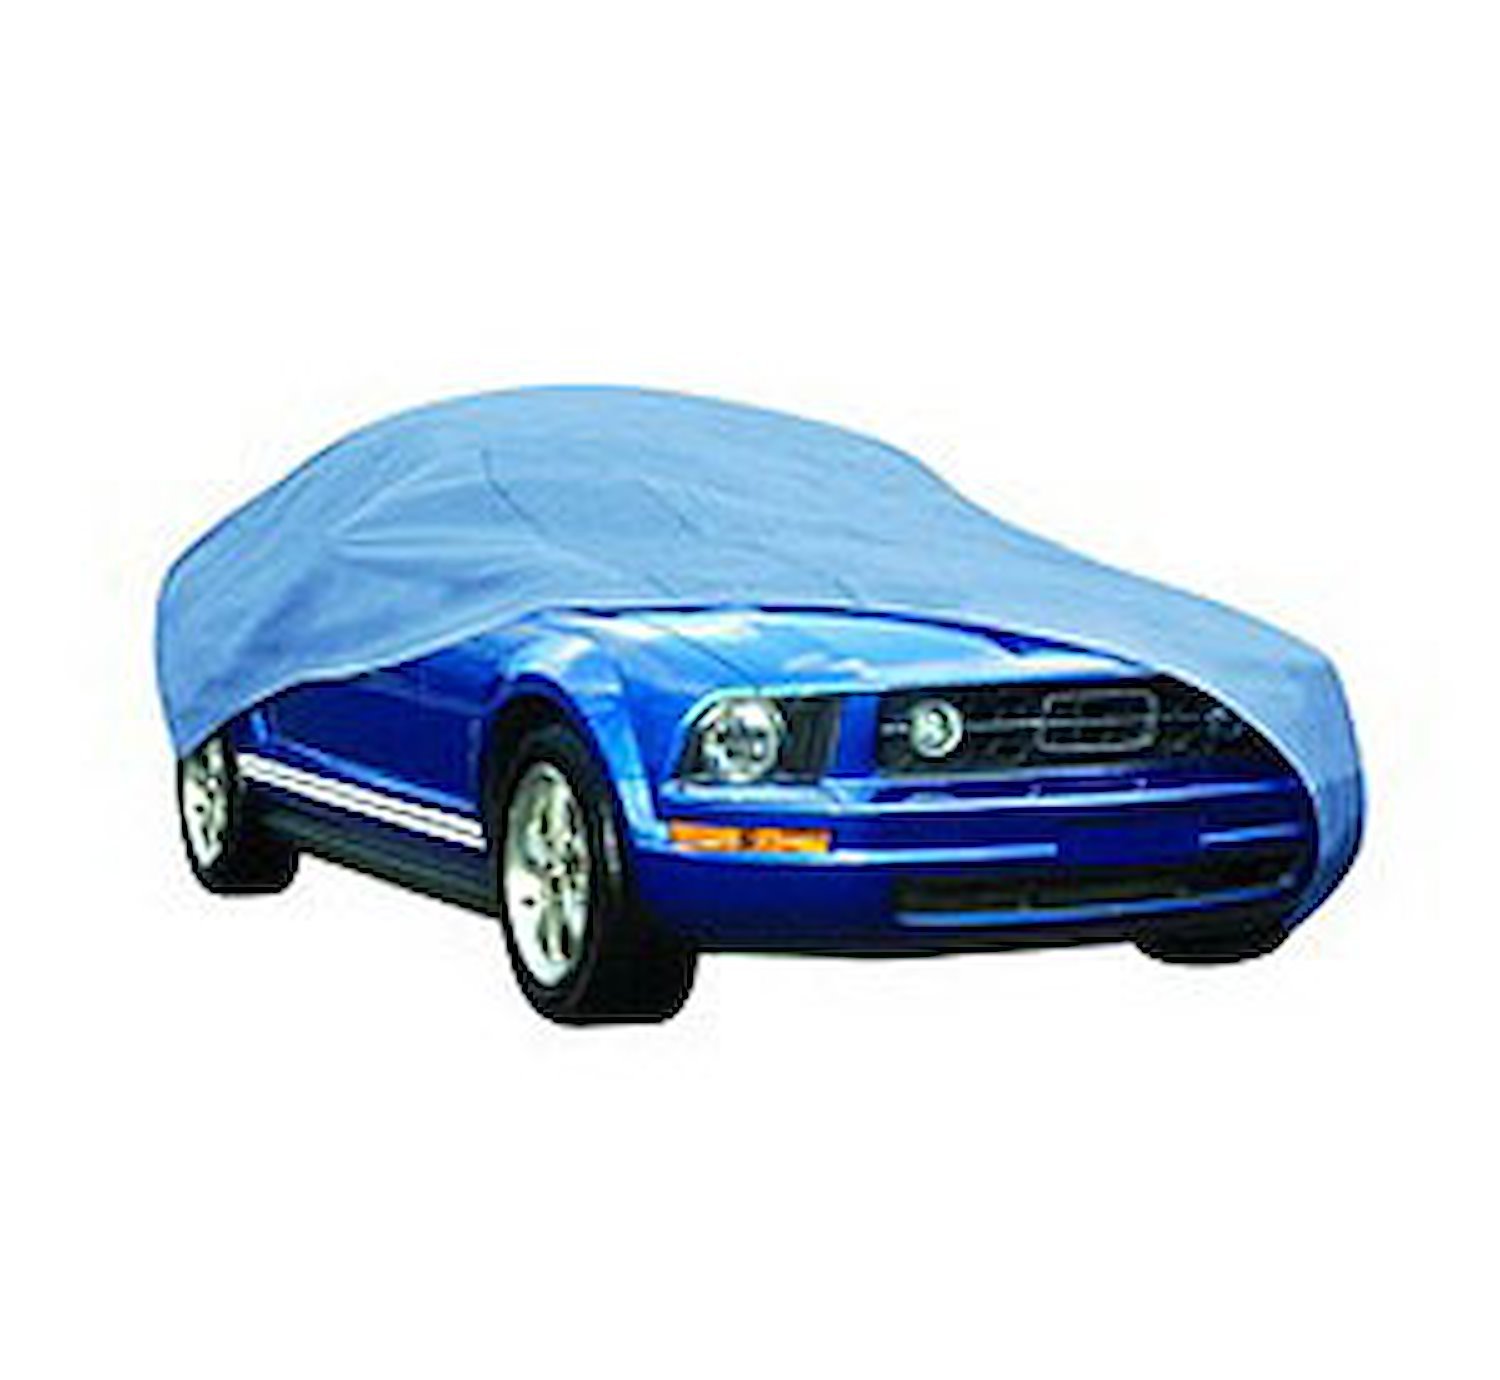 Duro Car Cover Fits Cars Up To 16" 8" in Length